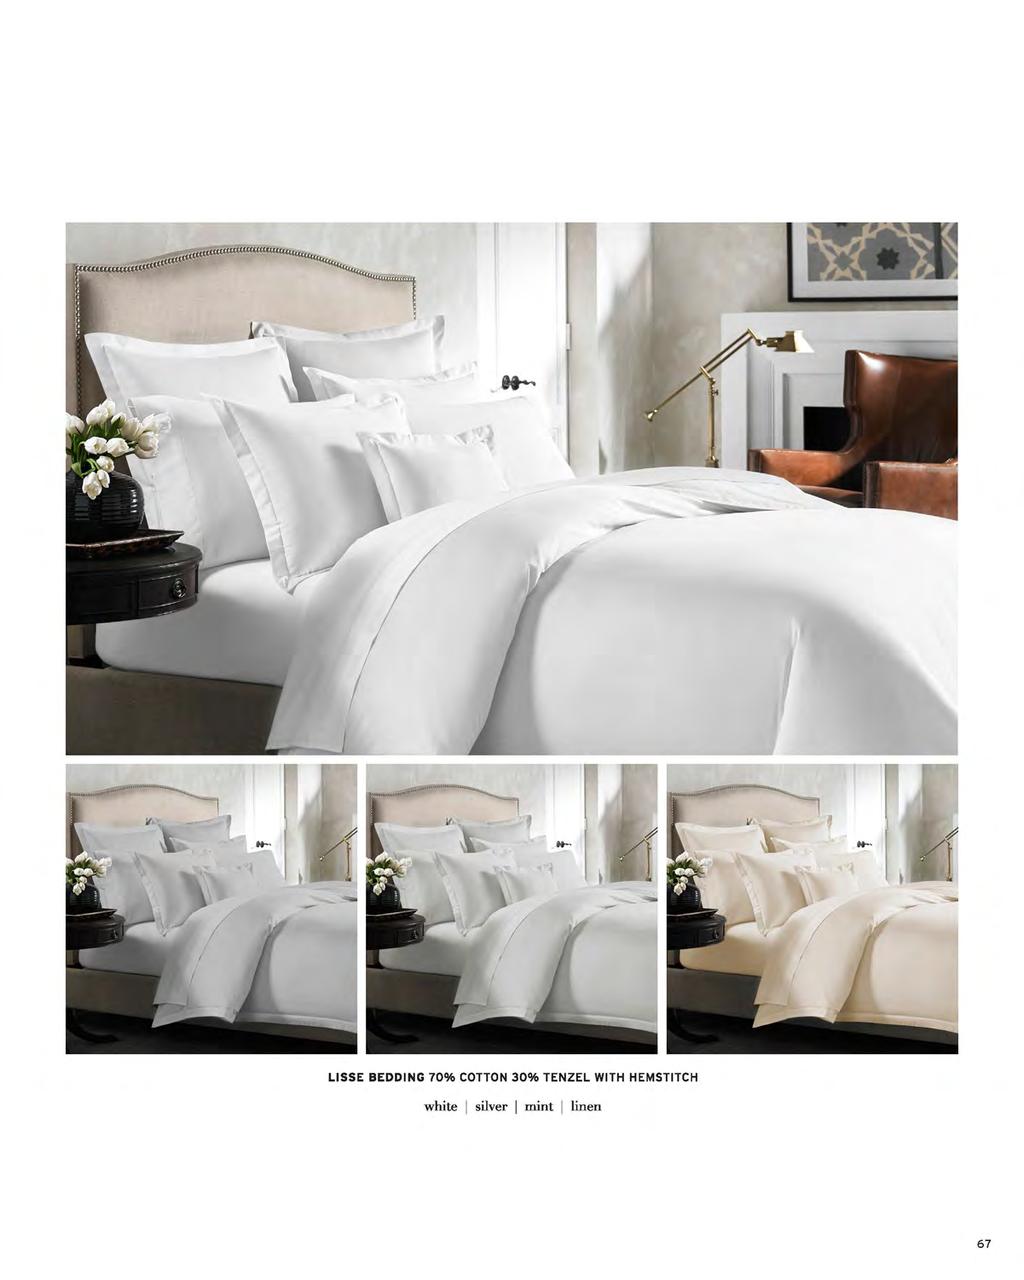 LISSE BEDDING 70% COTTON 30% TENZEL WITH